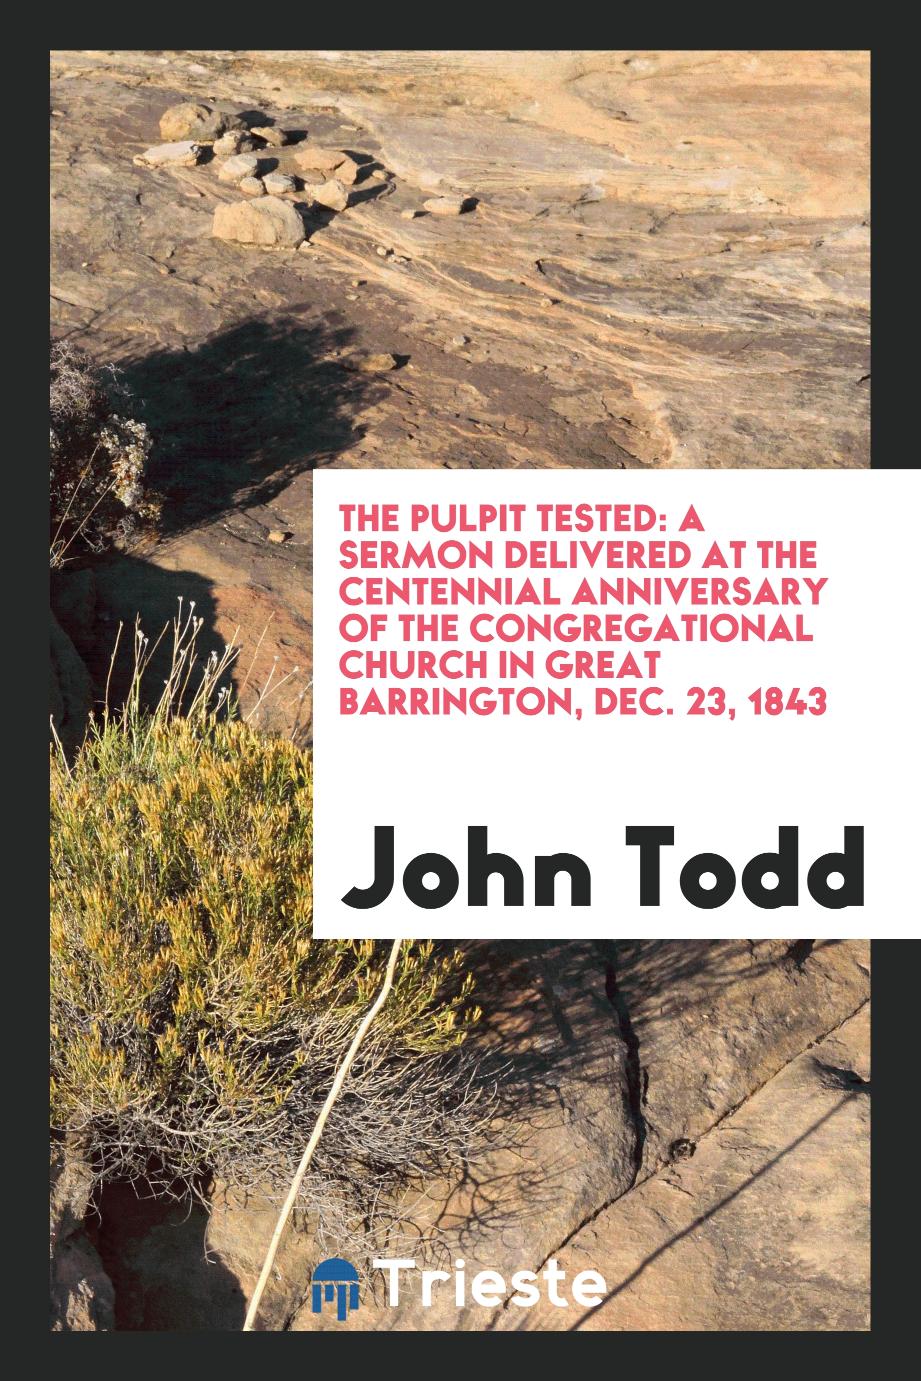 The Pulpit Tested: A Sermon Delivered at the Centennial Anniversary of the Congregational Church in Great Barrington, Dec. 23, 1843